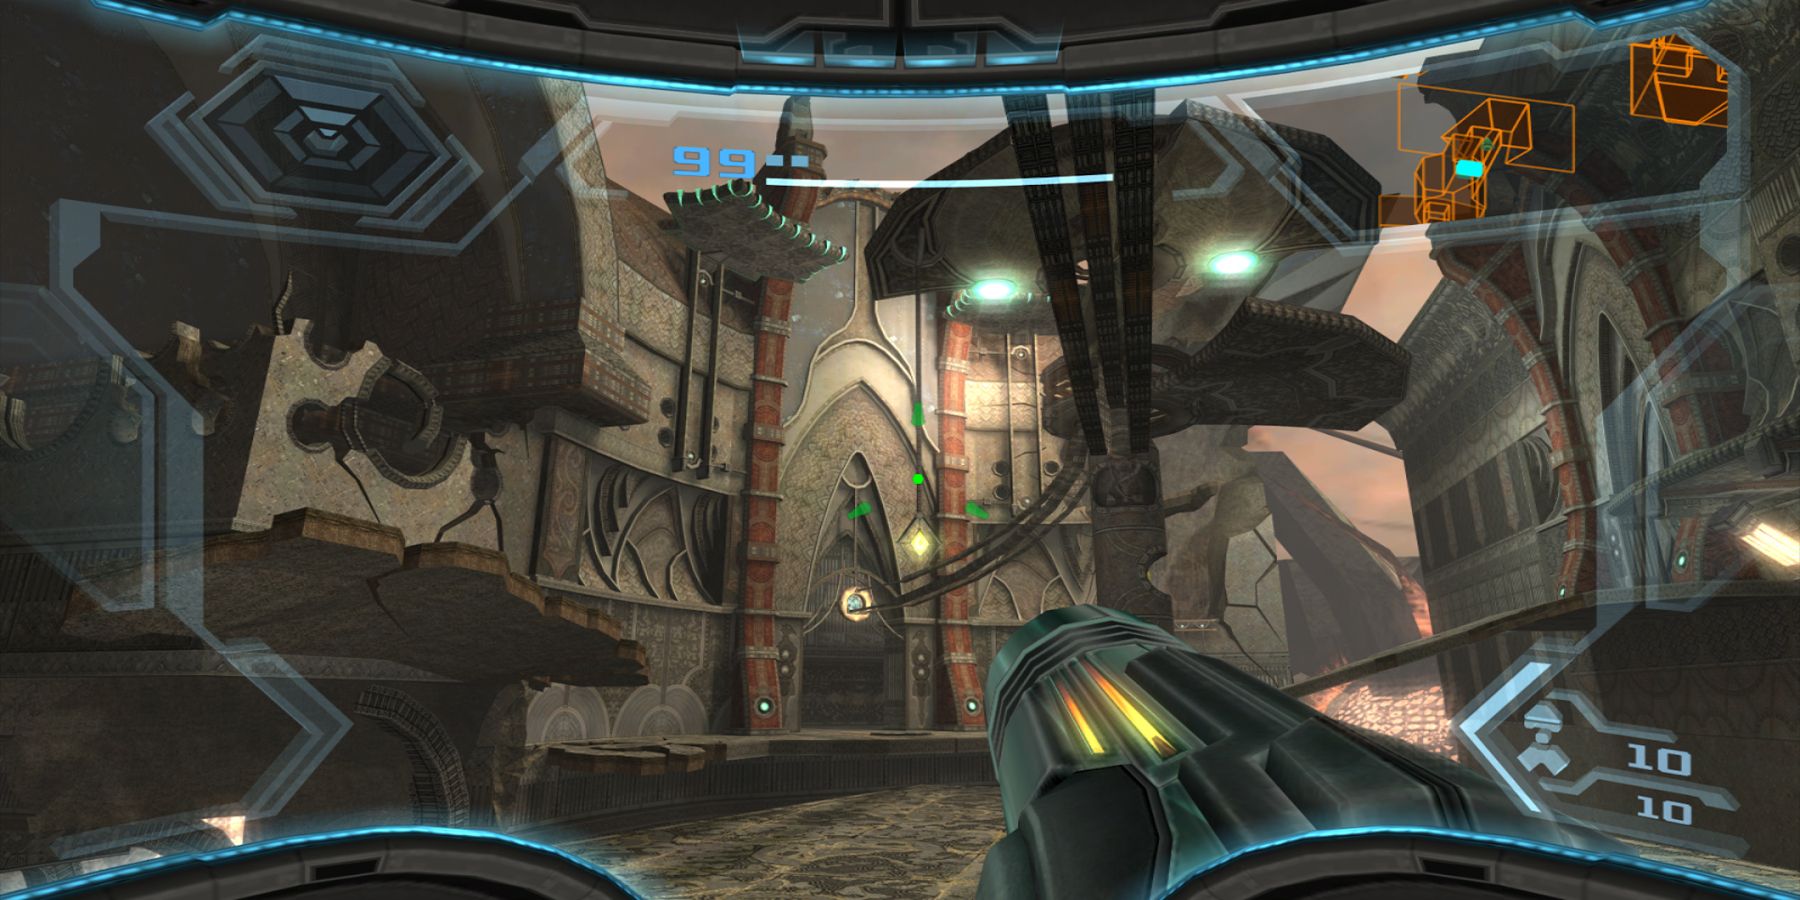 Gameplay from the GameCube game Metroid Prime.